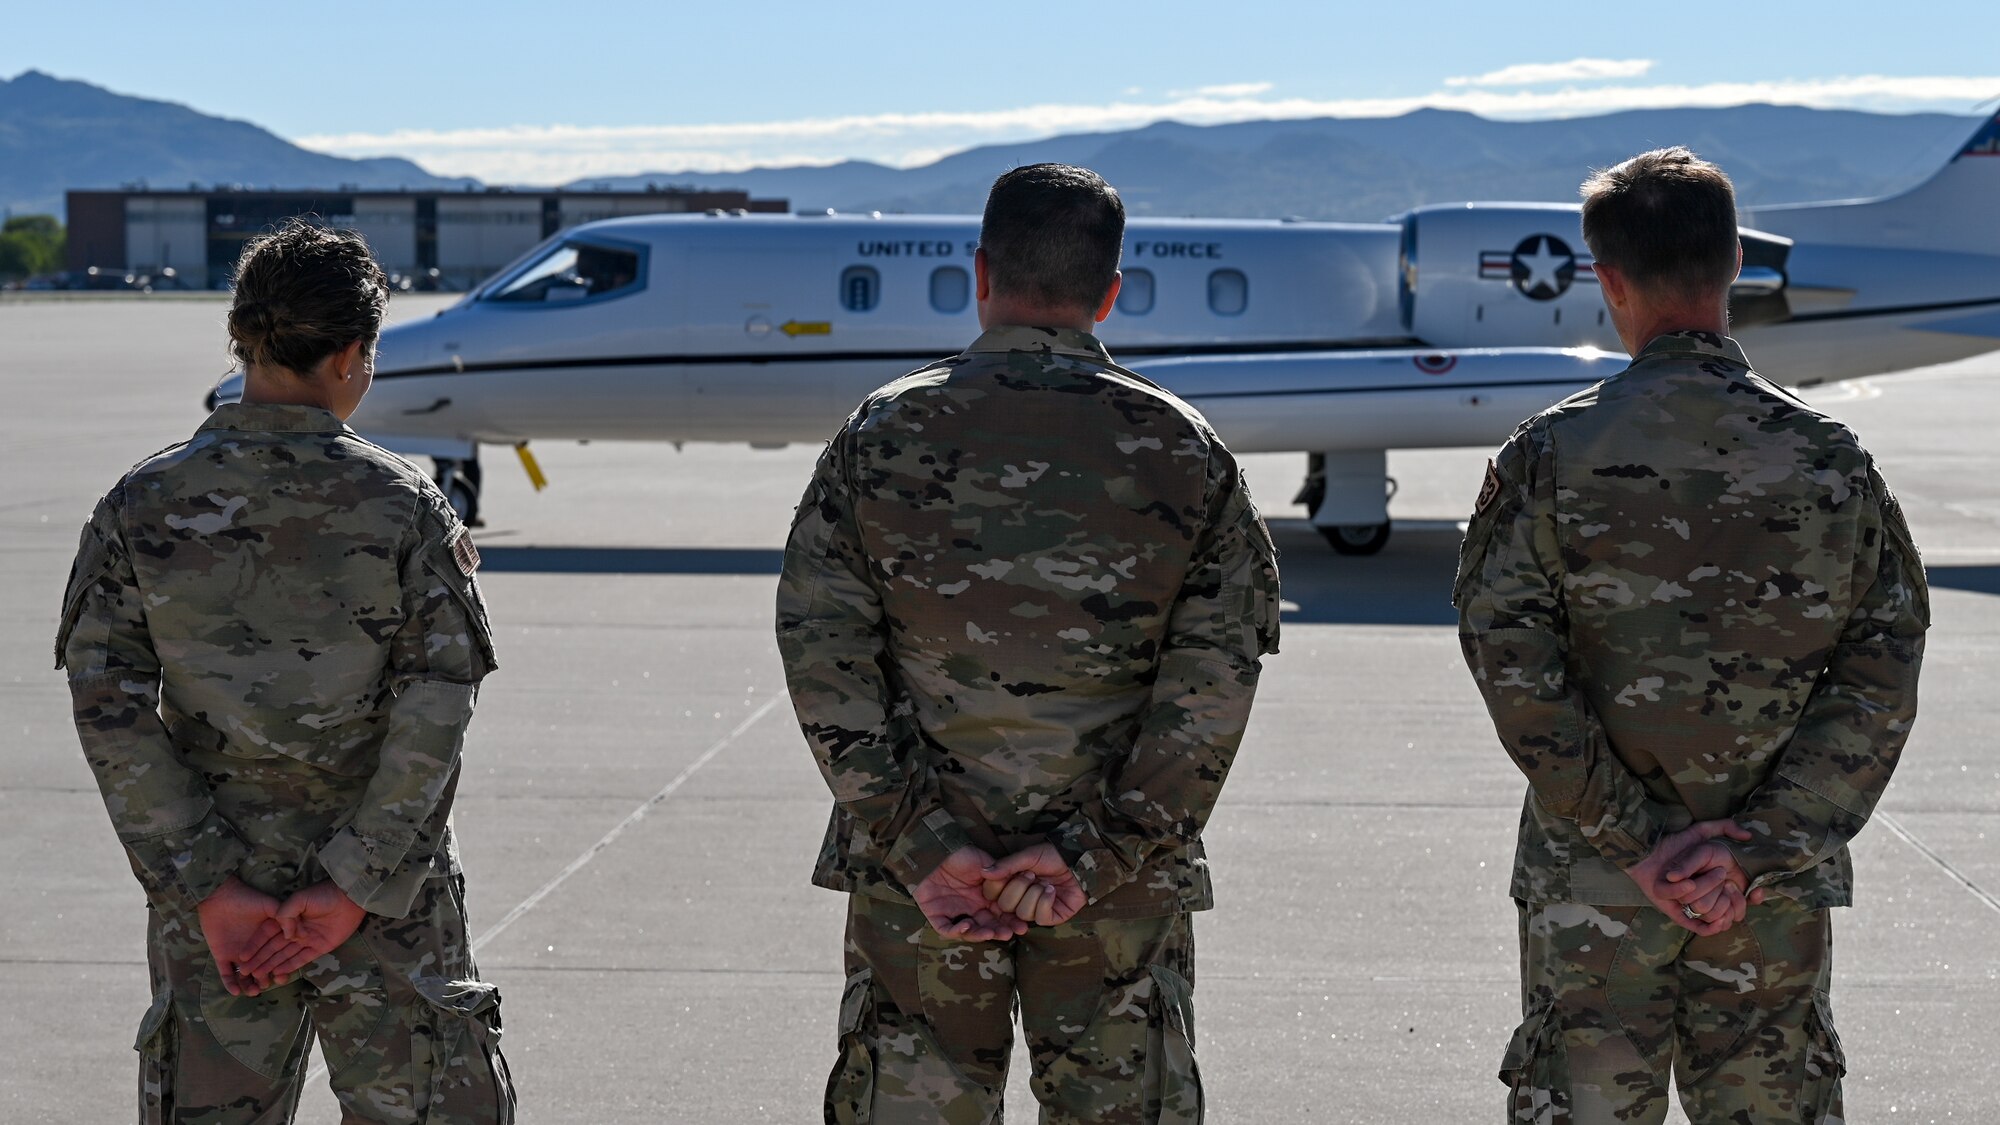 Three Airmen in uniform are shown from behind facing a plane